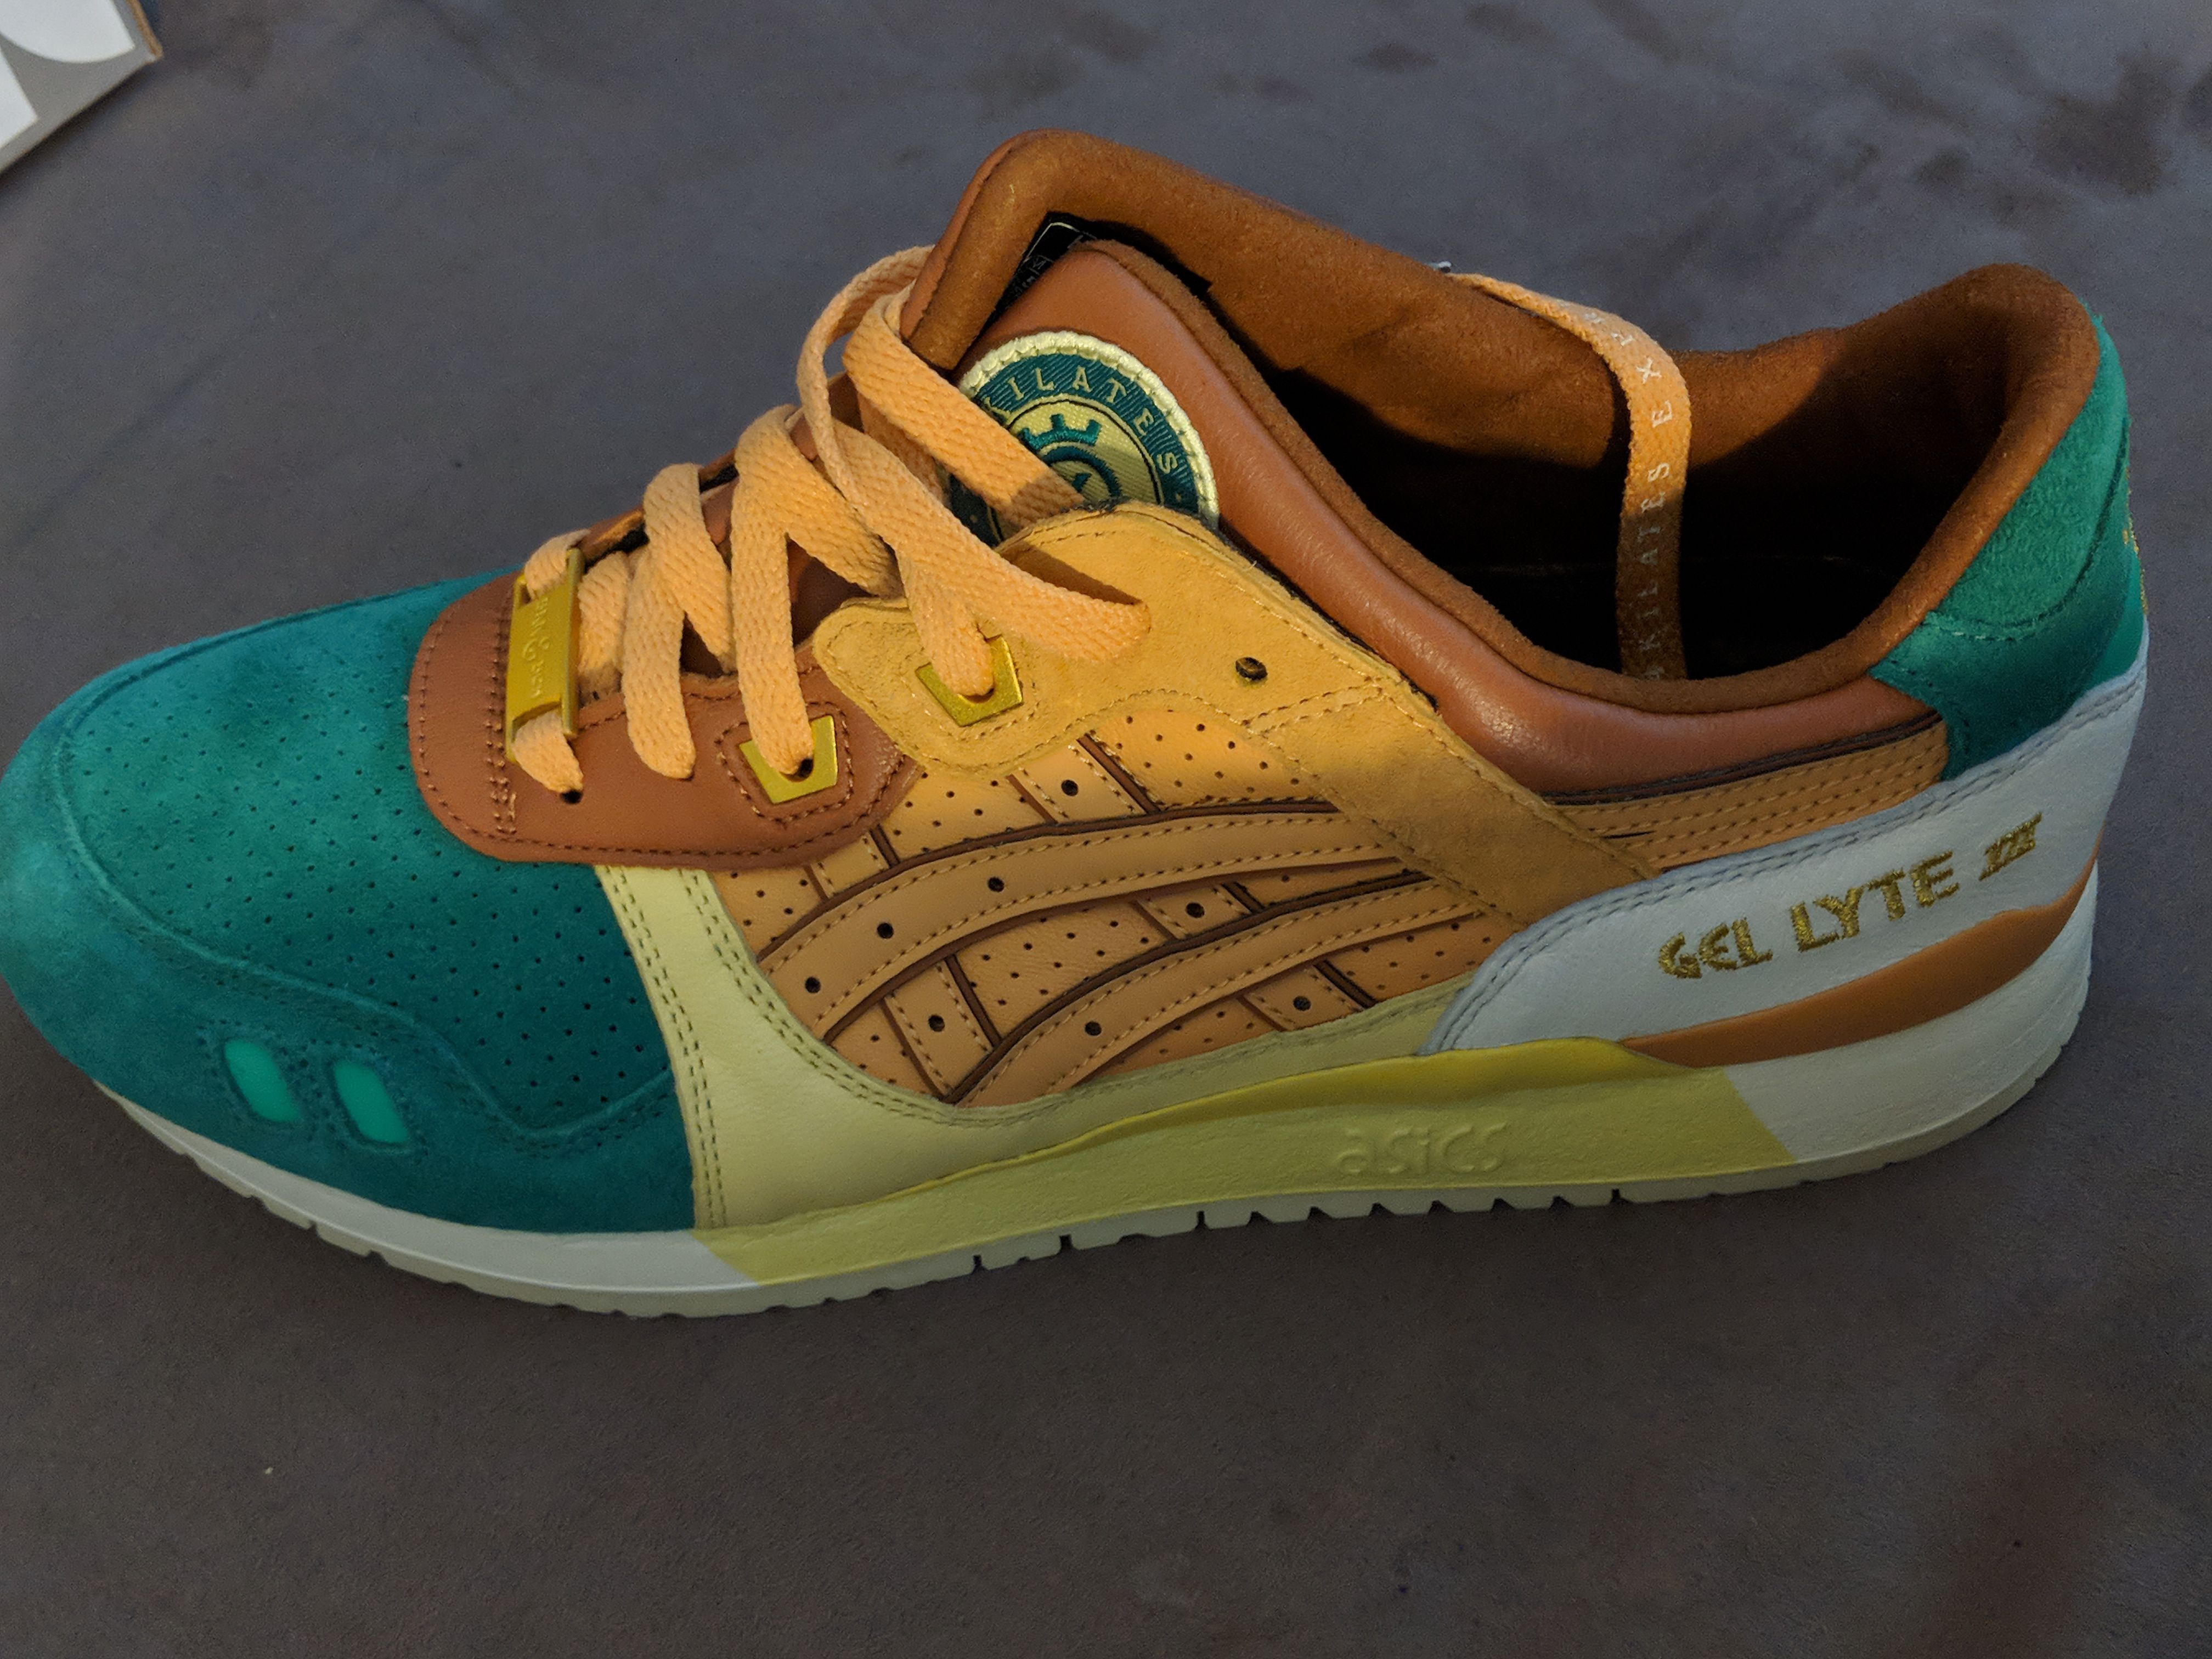 Asics X 24 Kilates Gel Lyte 'Express' bape kith palace for Sale in New York, NY - OfferUp